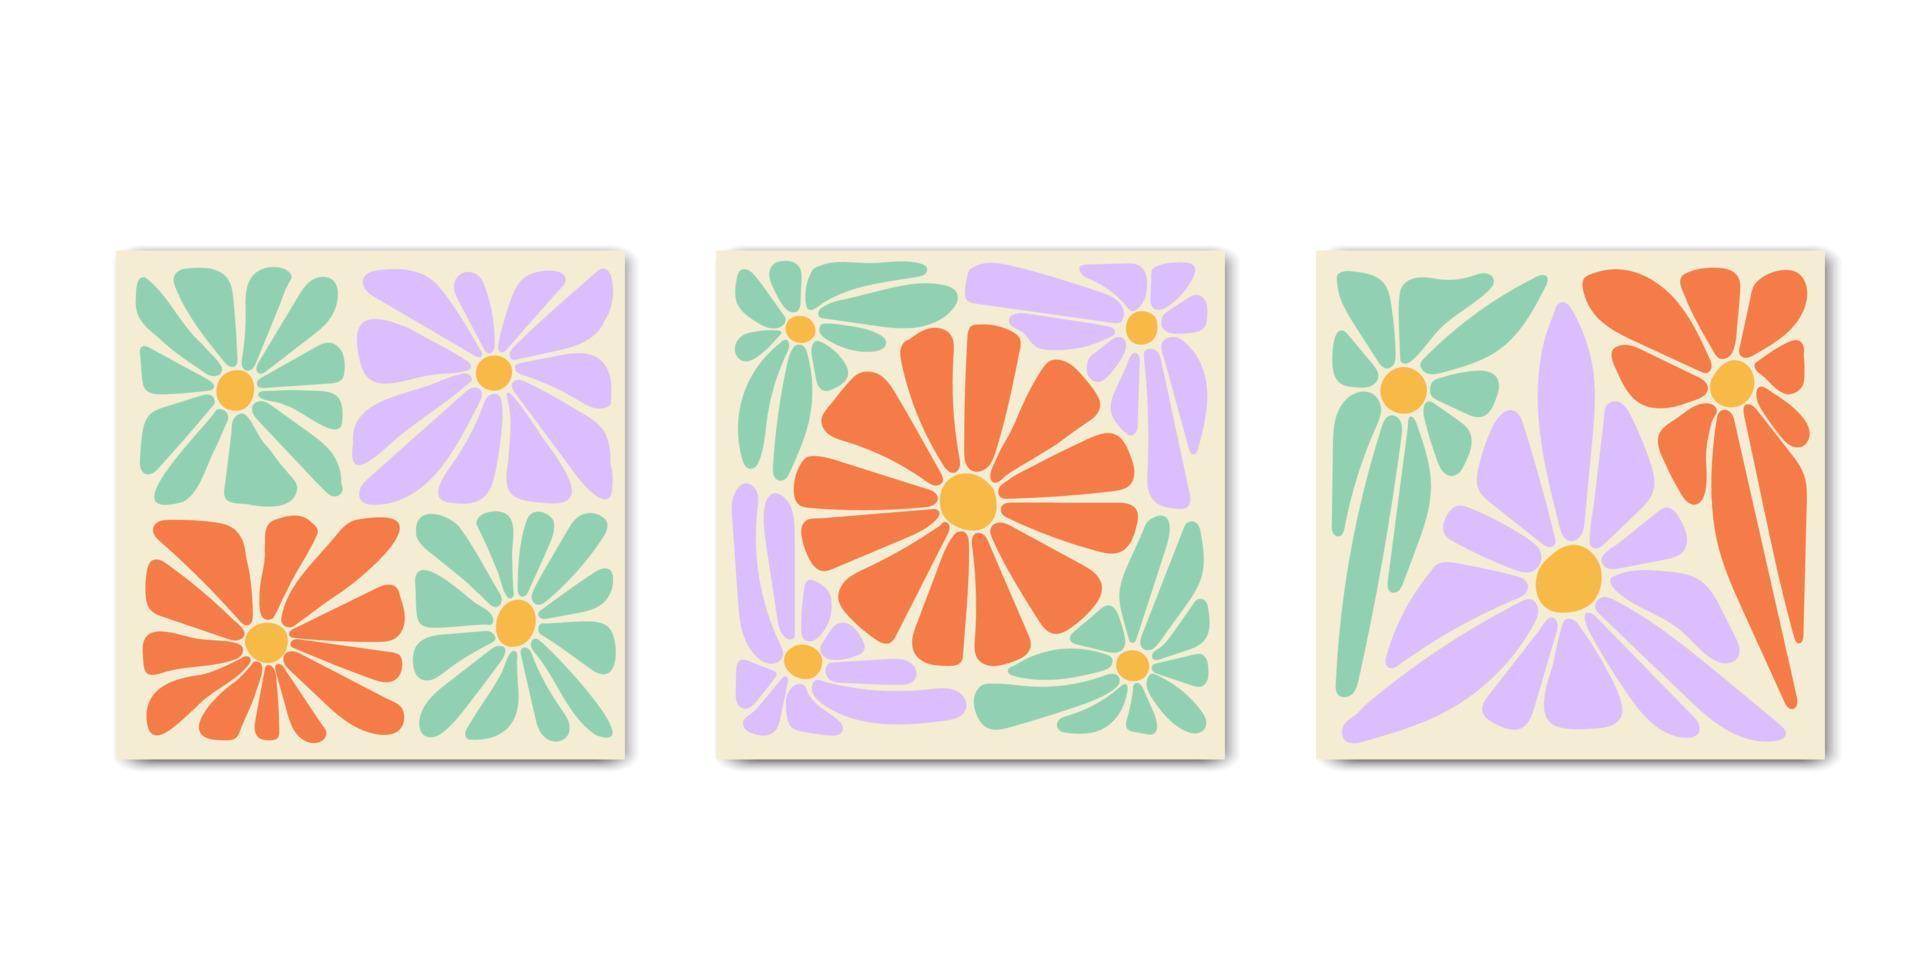 1970 daisy flowers retro square covers set. Abstract groovy trippy floral pattern. Minimalistic vintage poster card, wall art, banner, background. Vector illustration